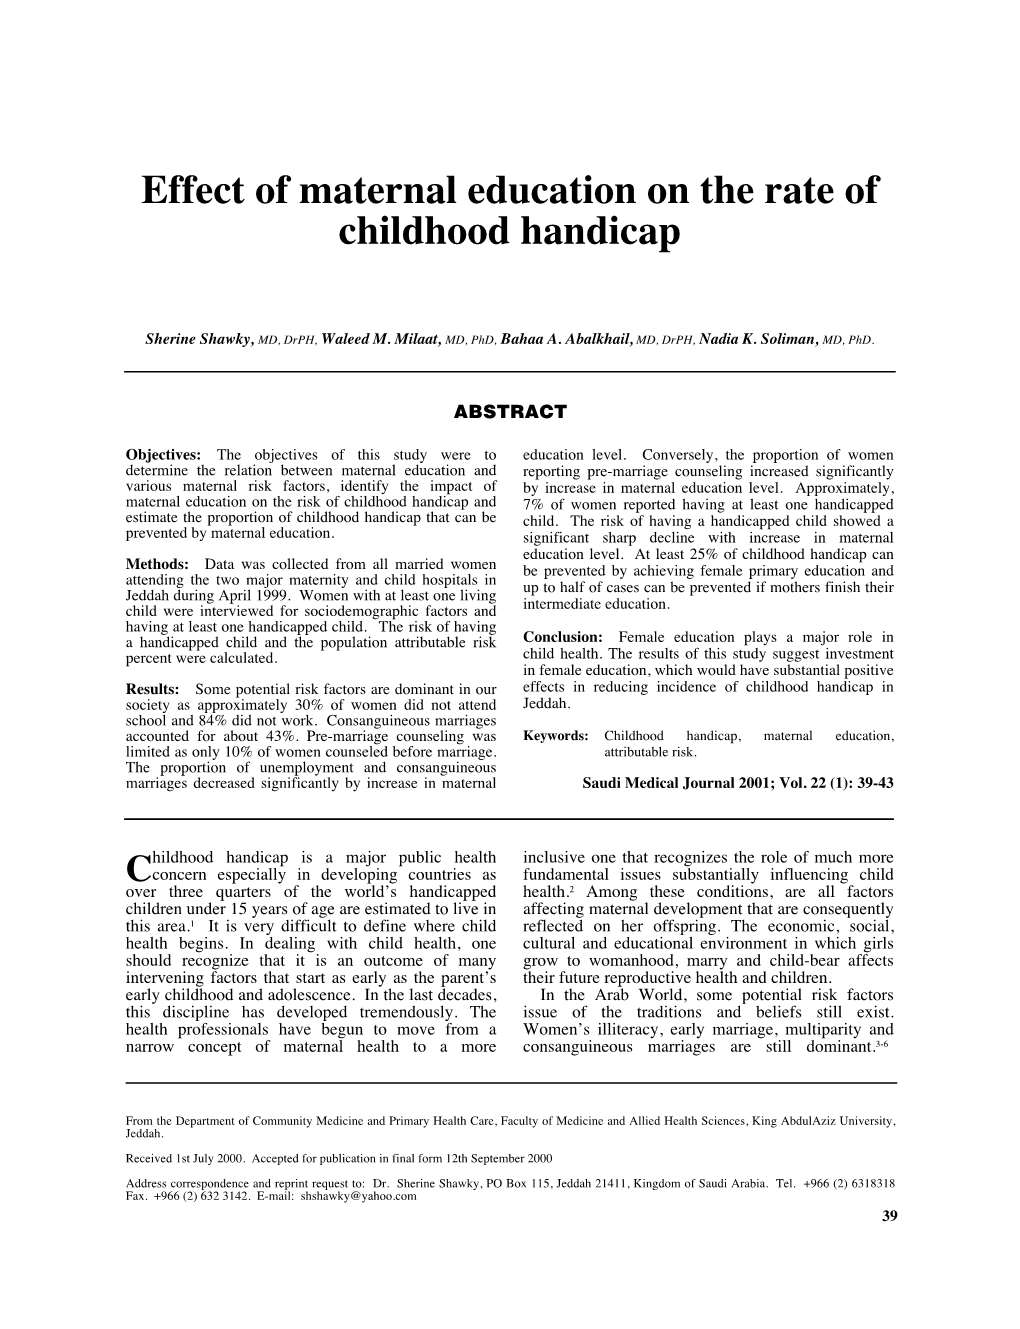 Effect of Maternal Education on the Rate of Childhood Handicap